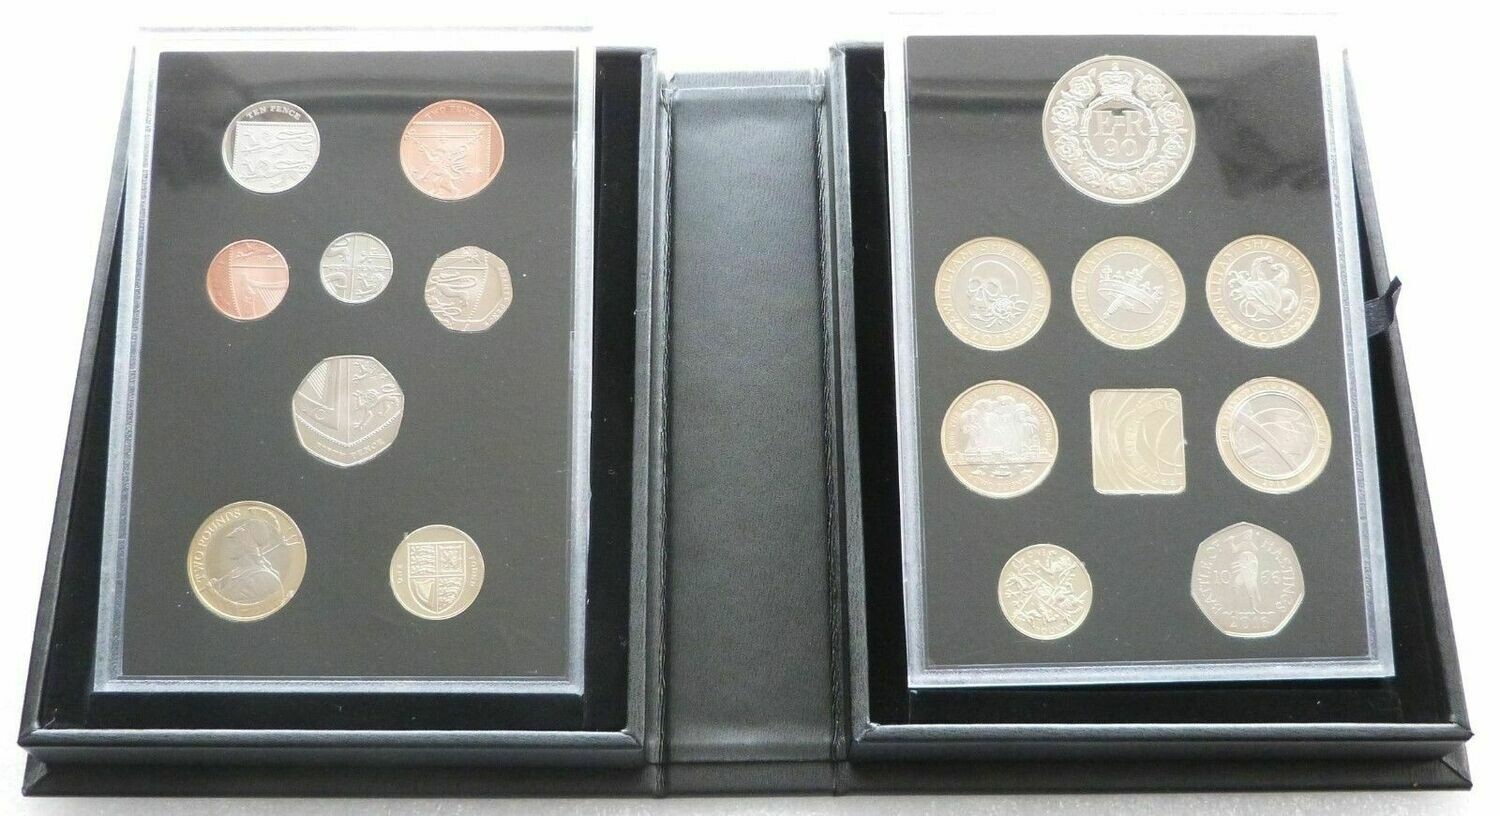 2016 Royal Mint Deluxe Collector Proof 16 Coin Set Box Coa